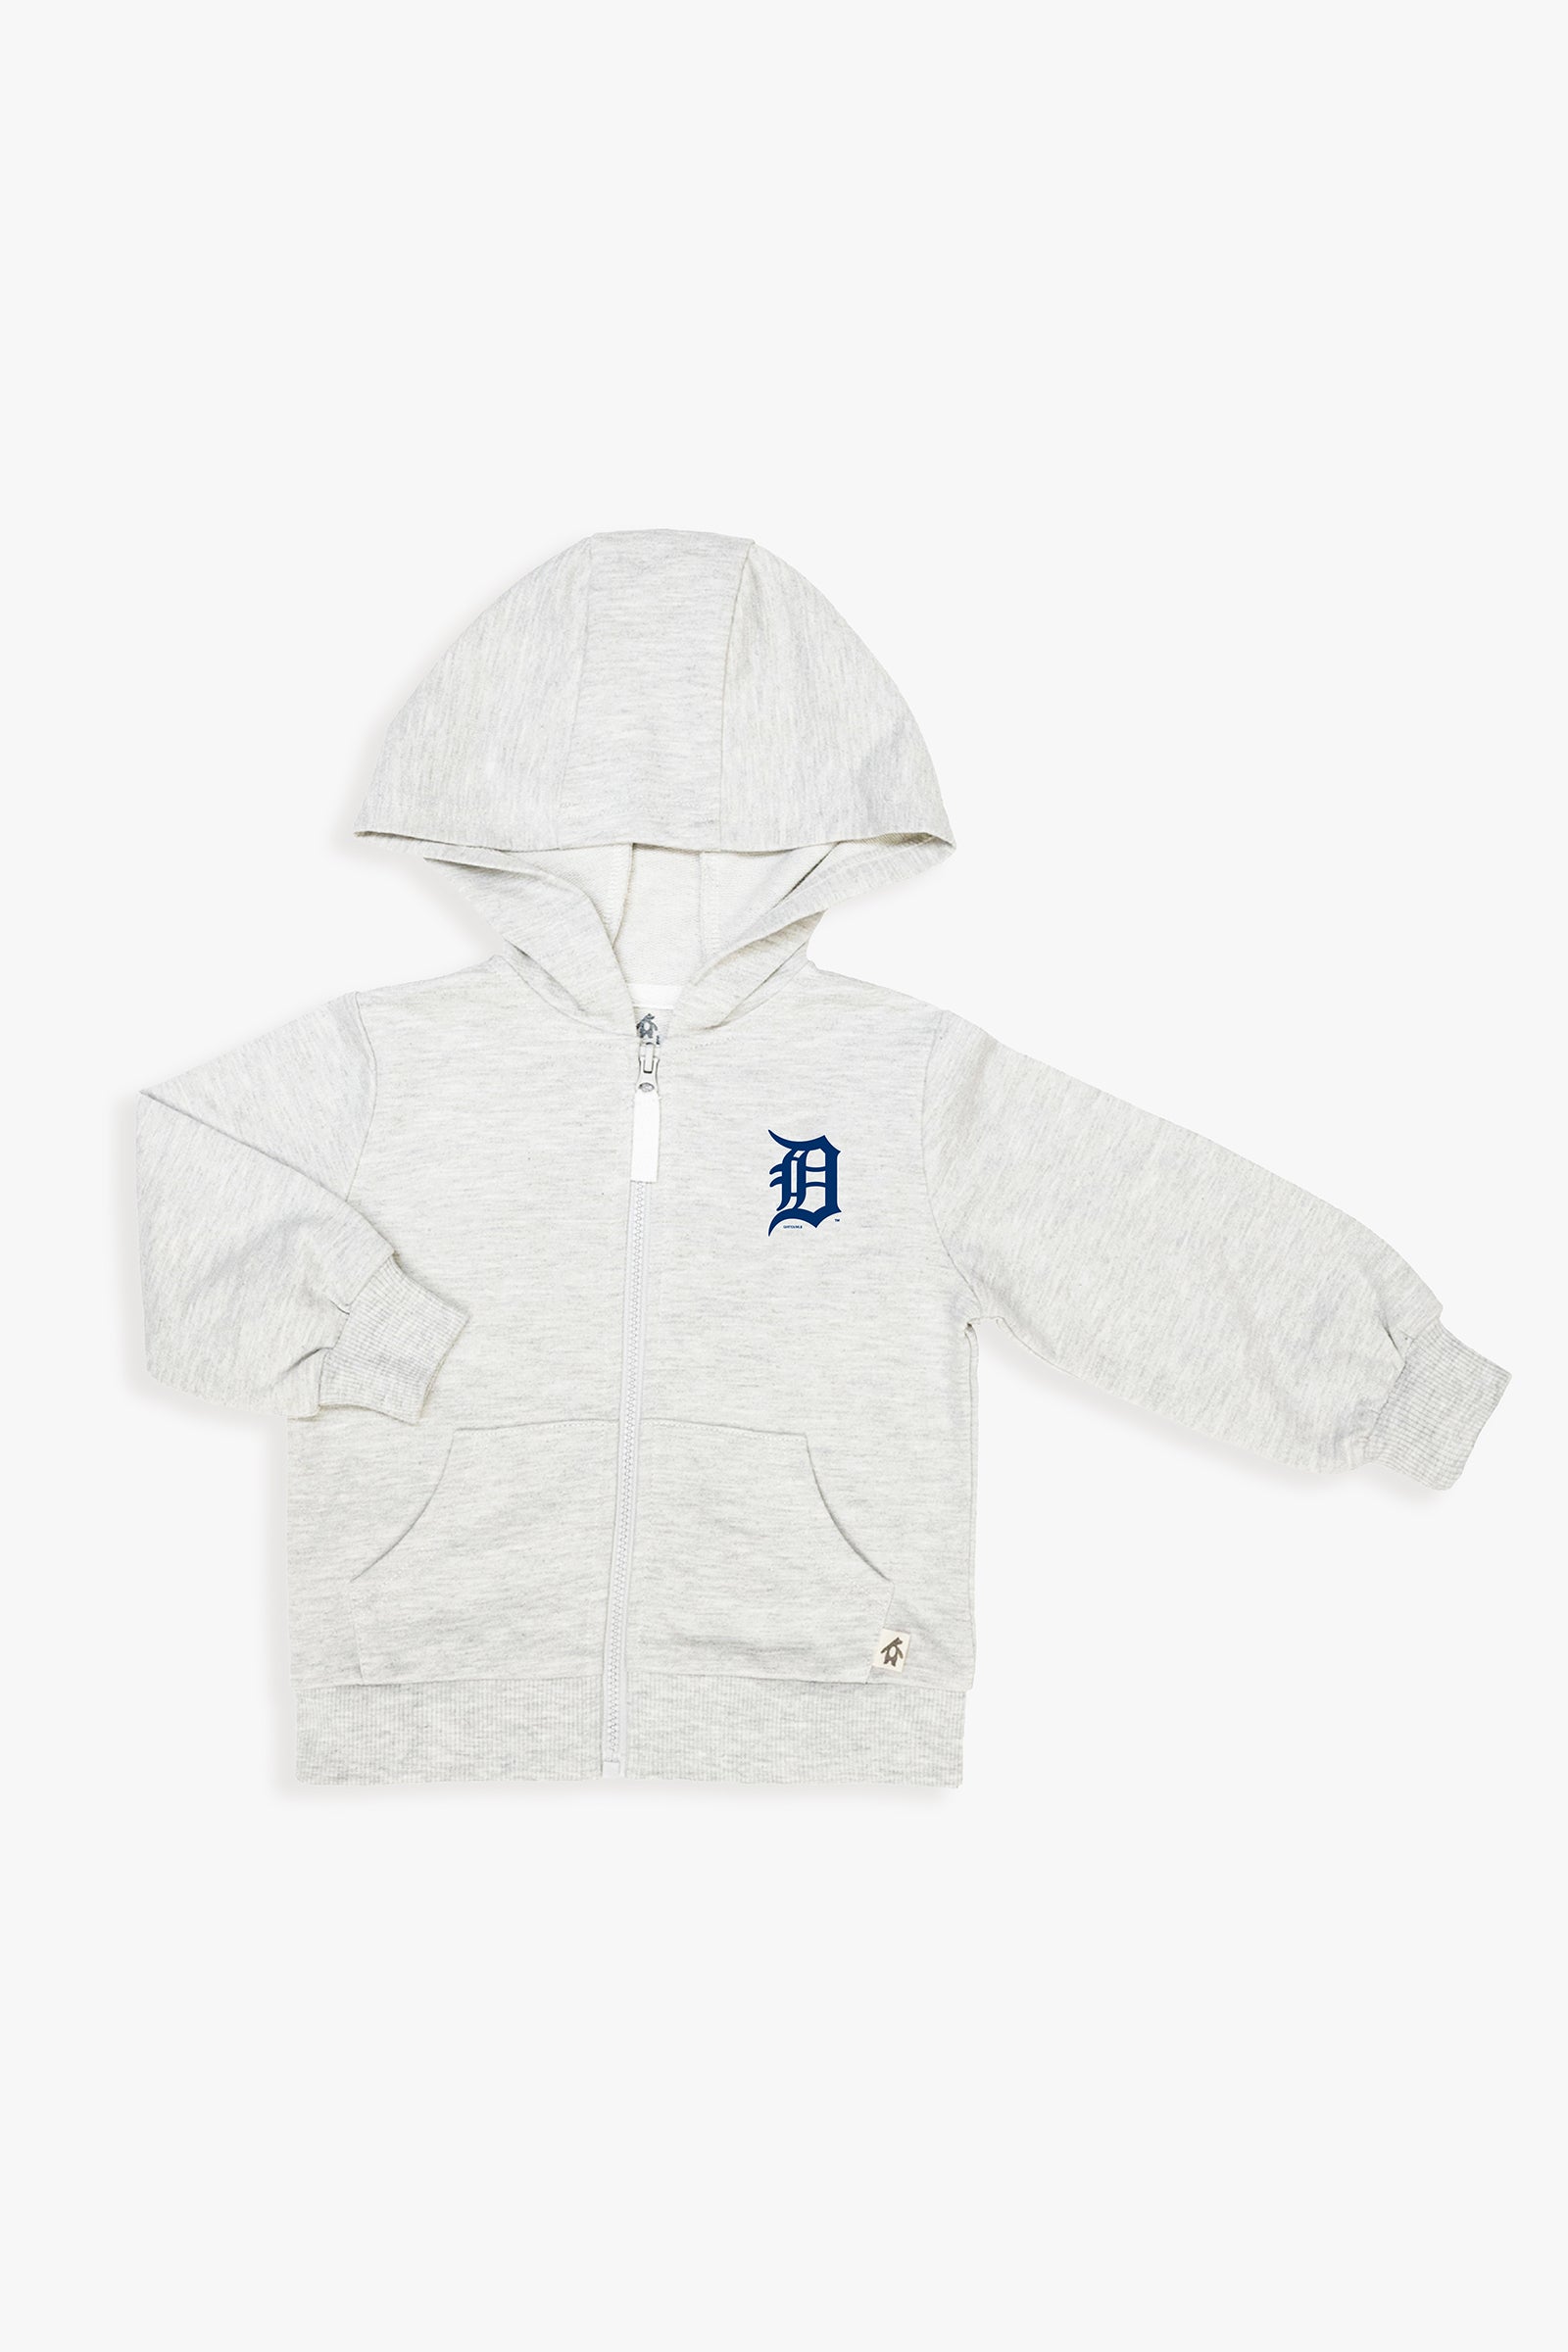 MLB Unisex Baby French Terry Cotton Zip-Up Hoodie